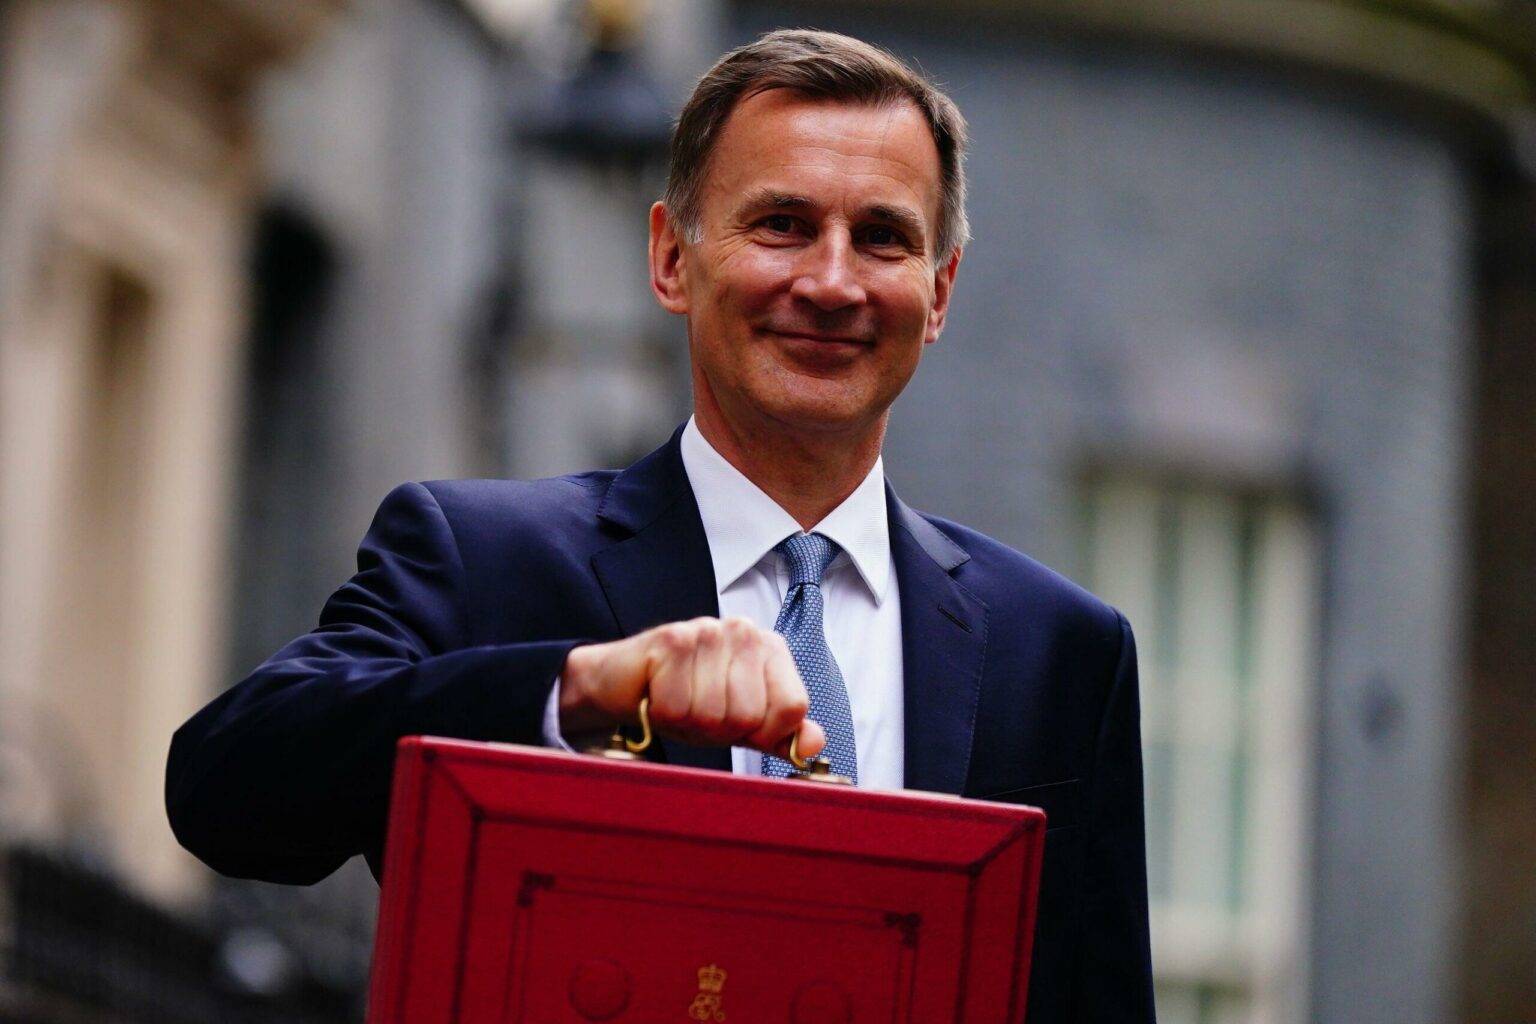 ‘Hunt scrambles to fund tax cuts ahead of March Budget’ - the full perspective 